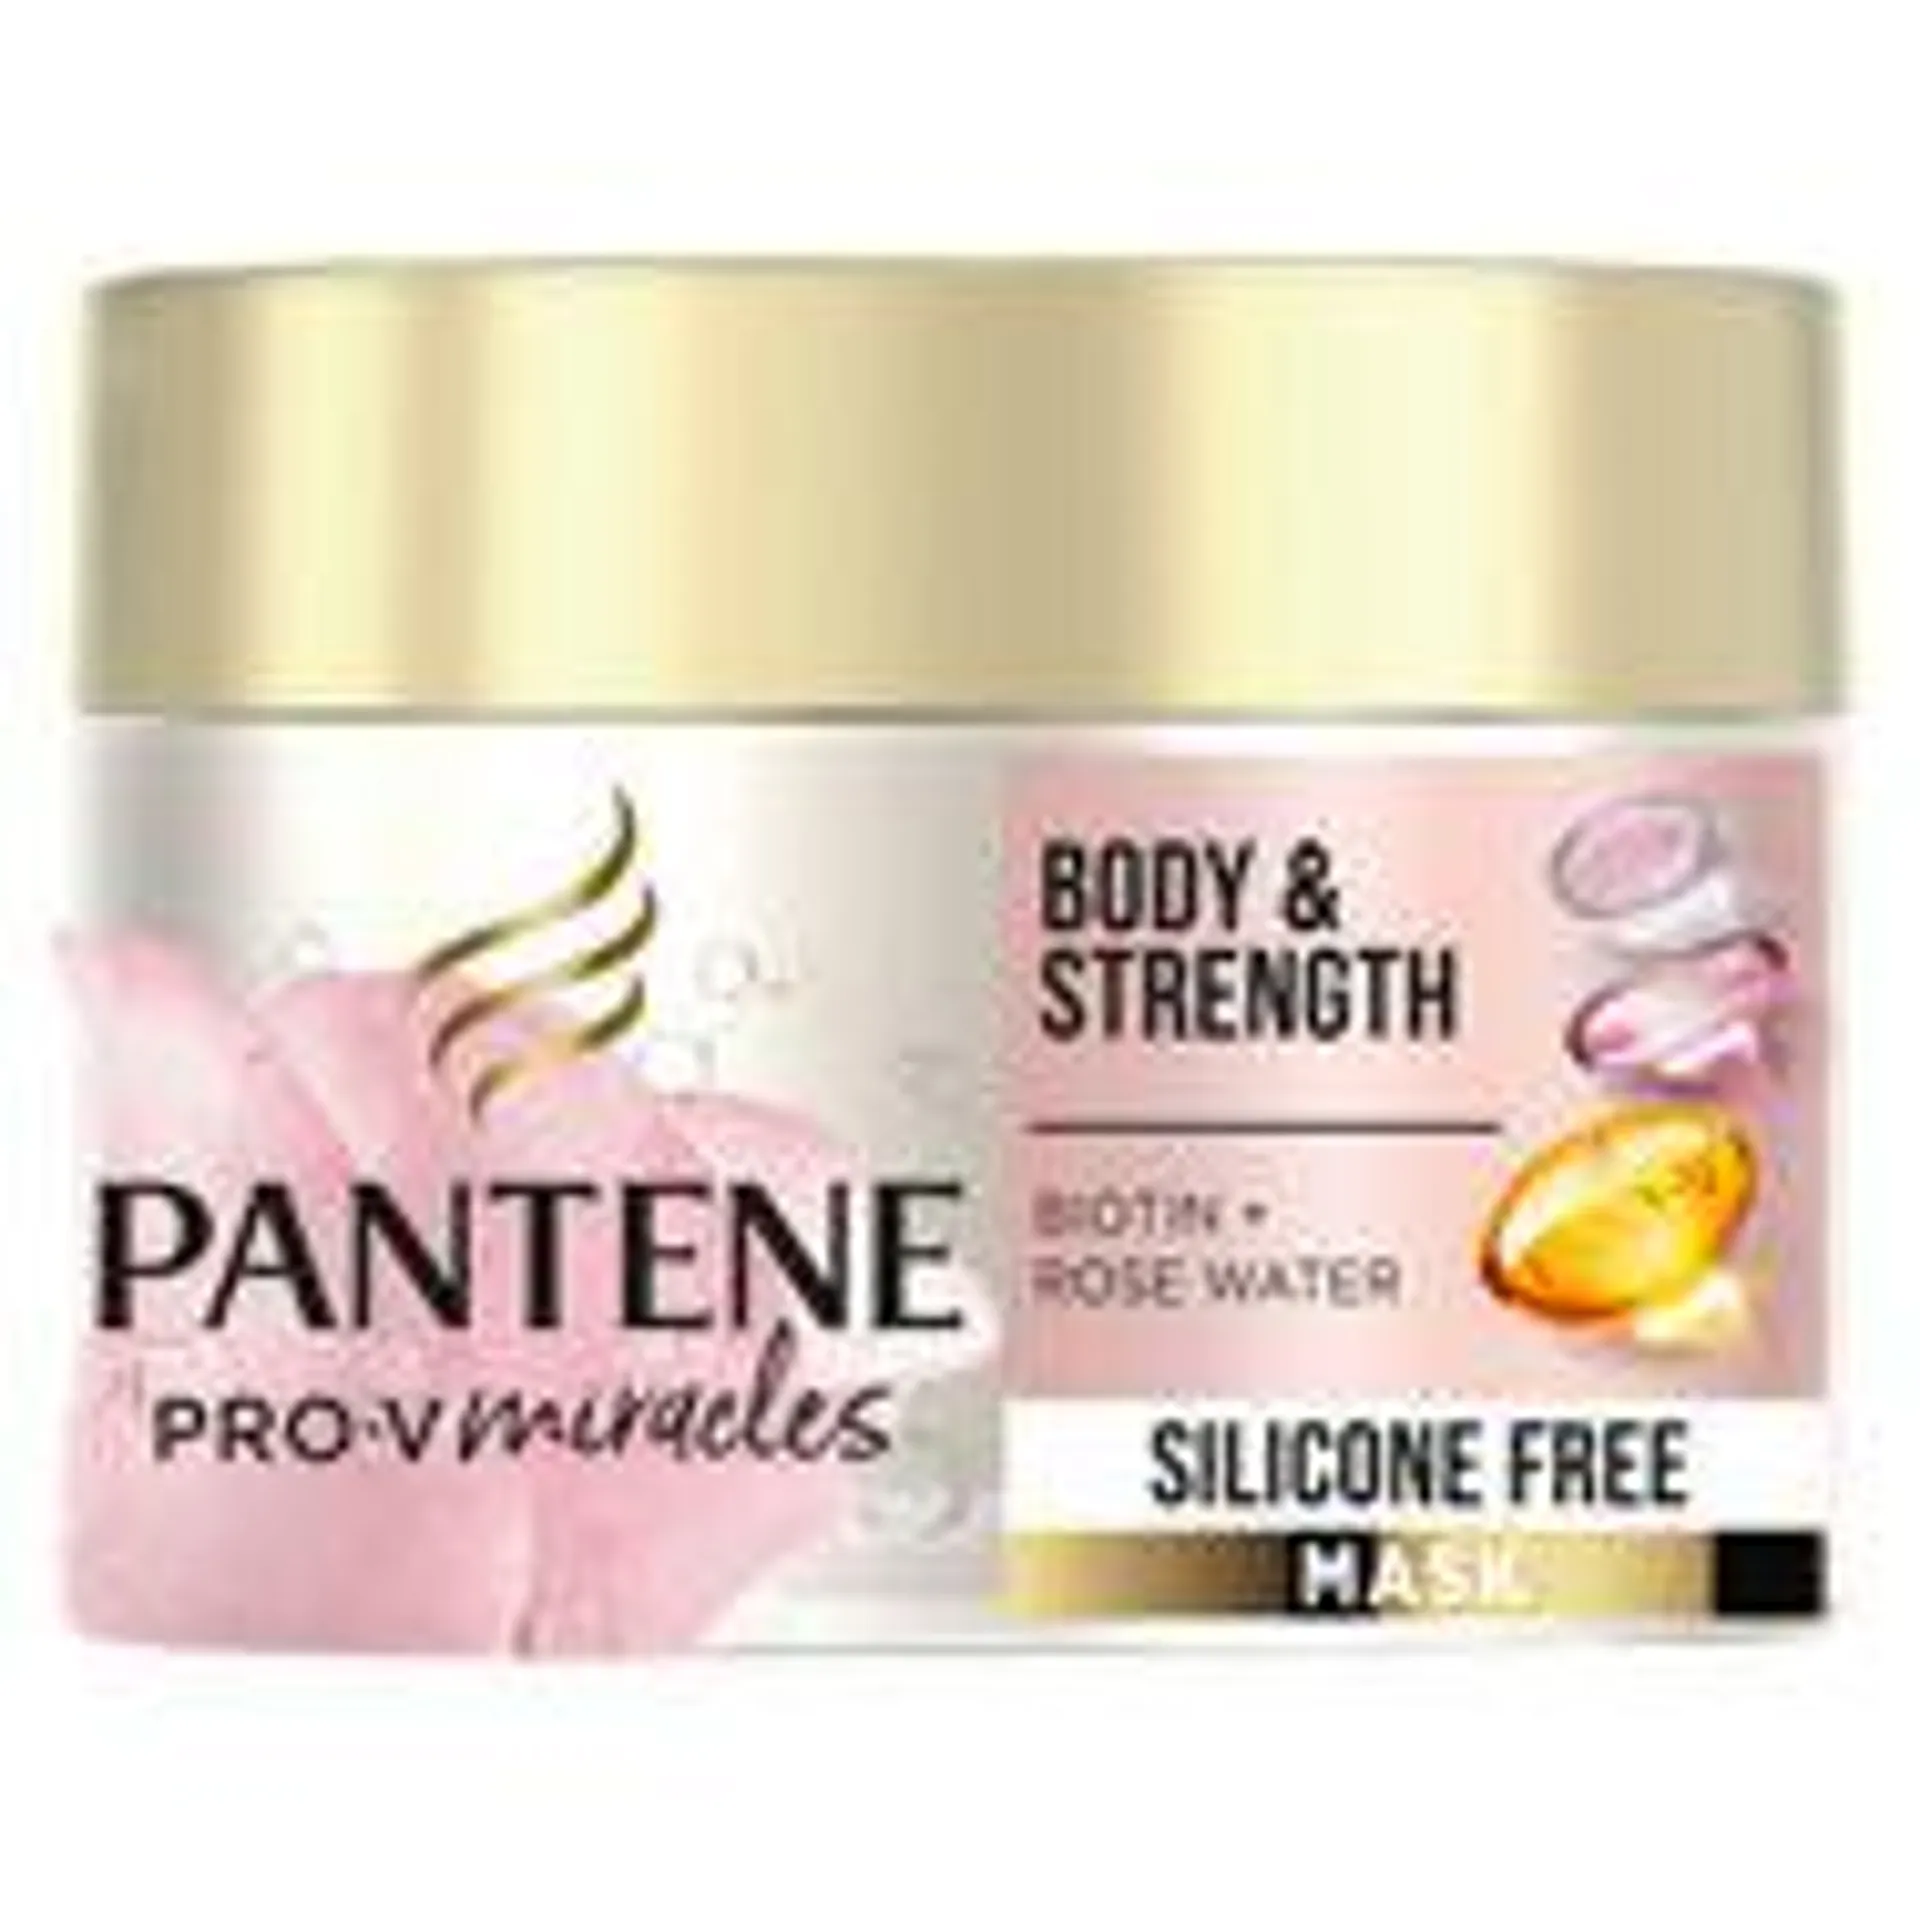 Pantene Pro-V Body & Strength Silicone Free Hair Mask, with Biotin and Rose Water